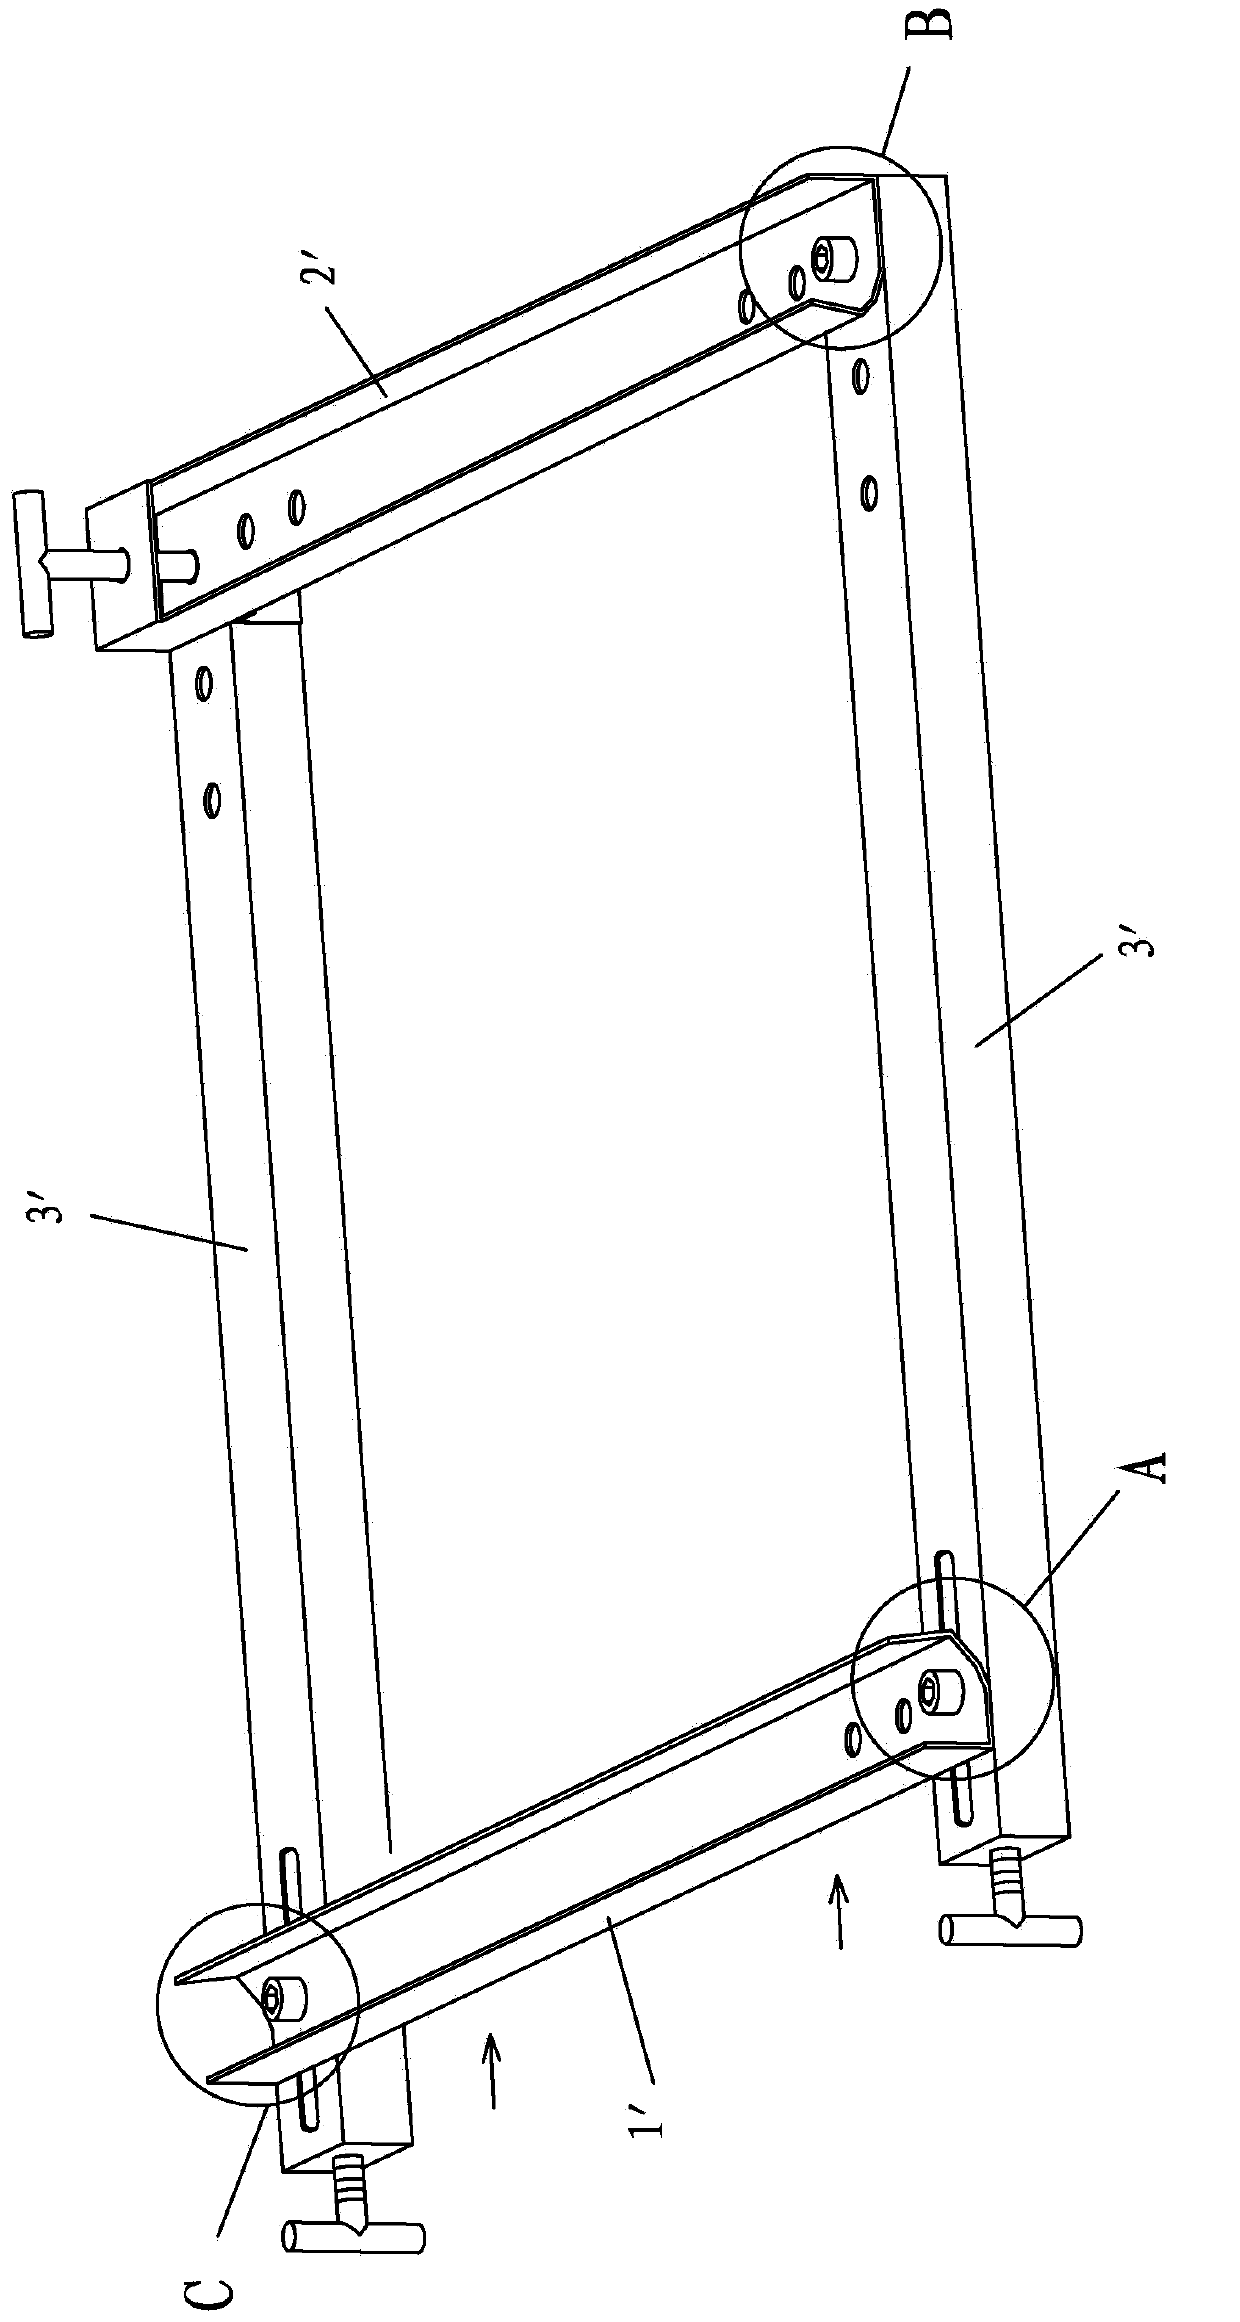 Quick insertion clamping frame of concrete blinding and method for clamping concrete blinding